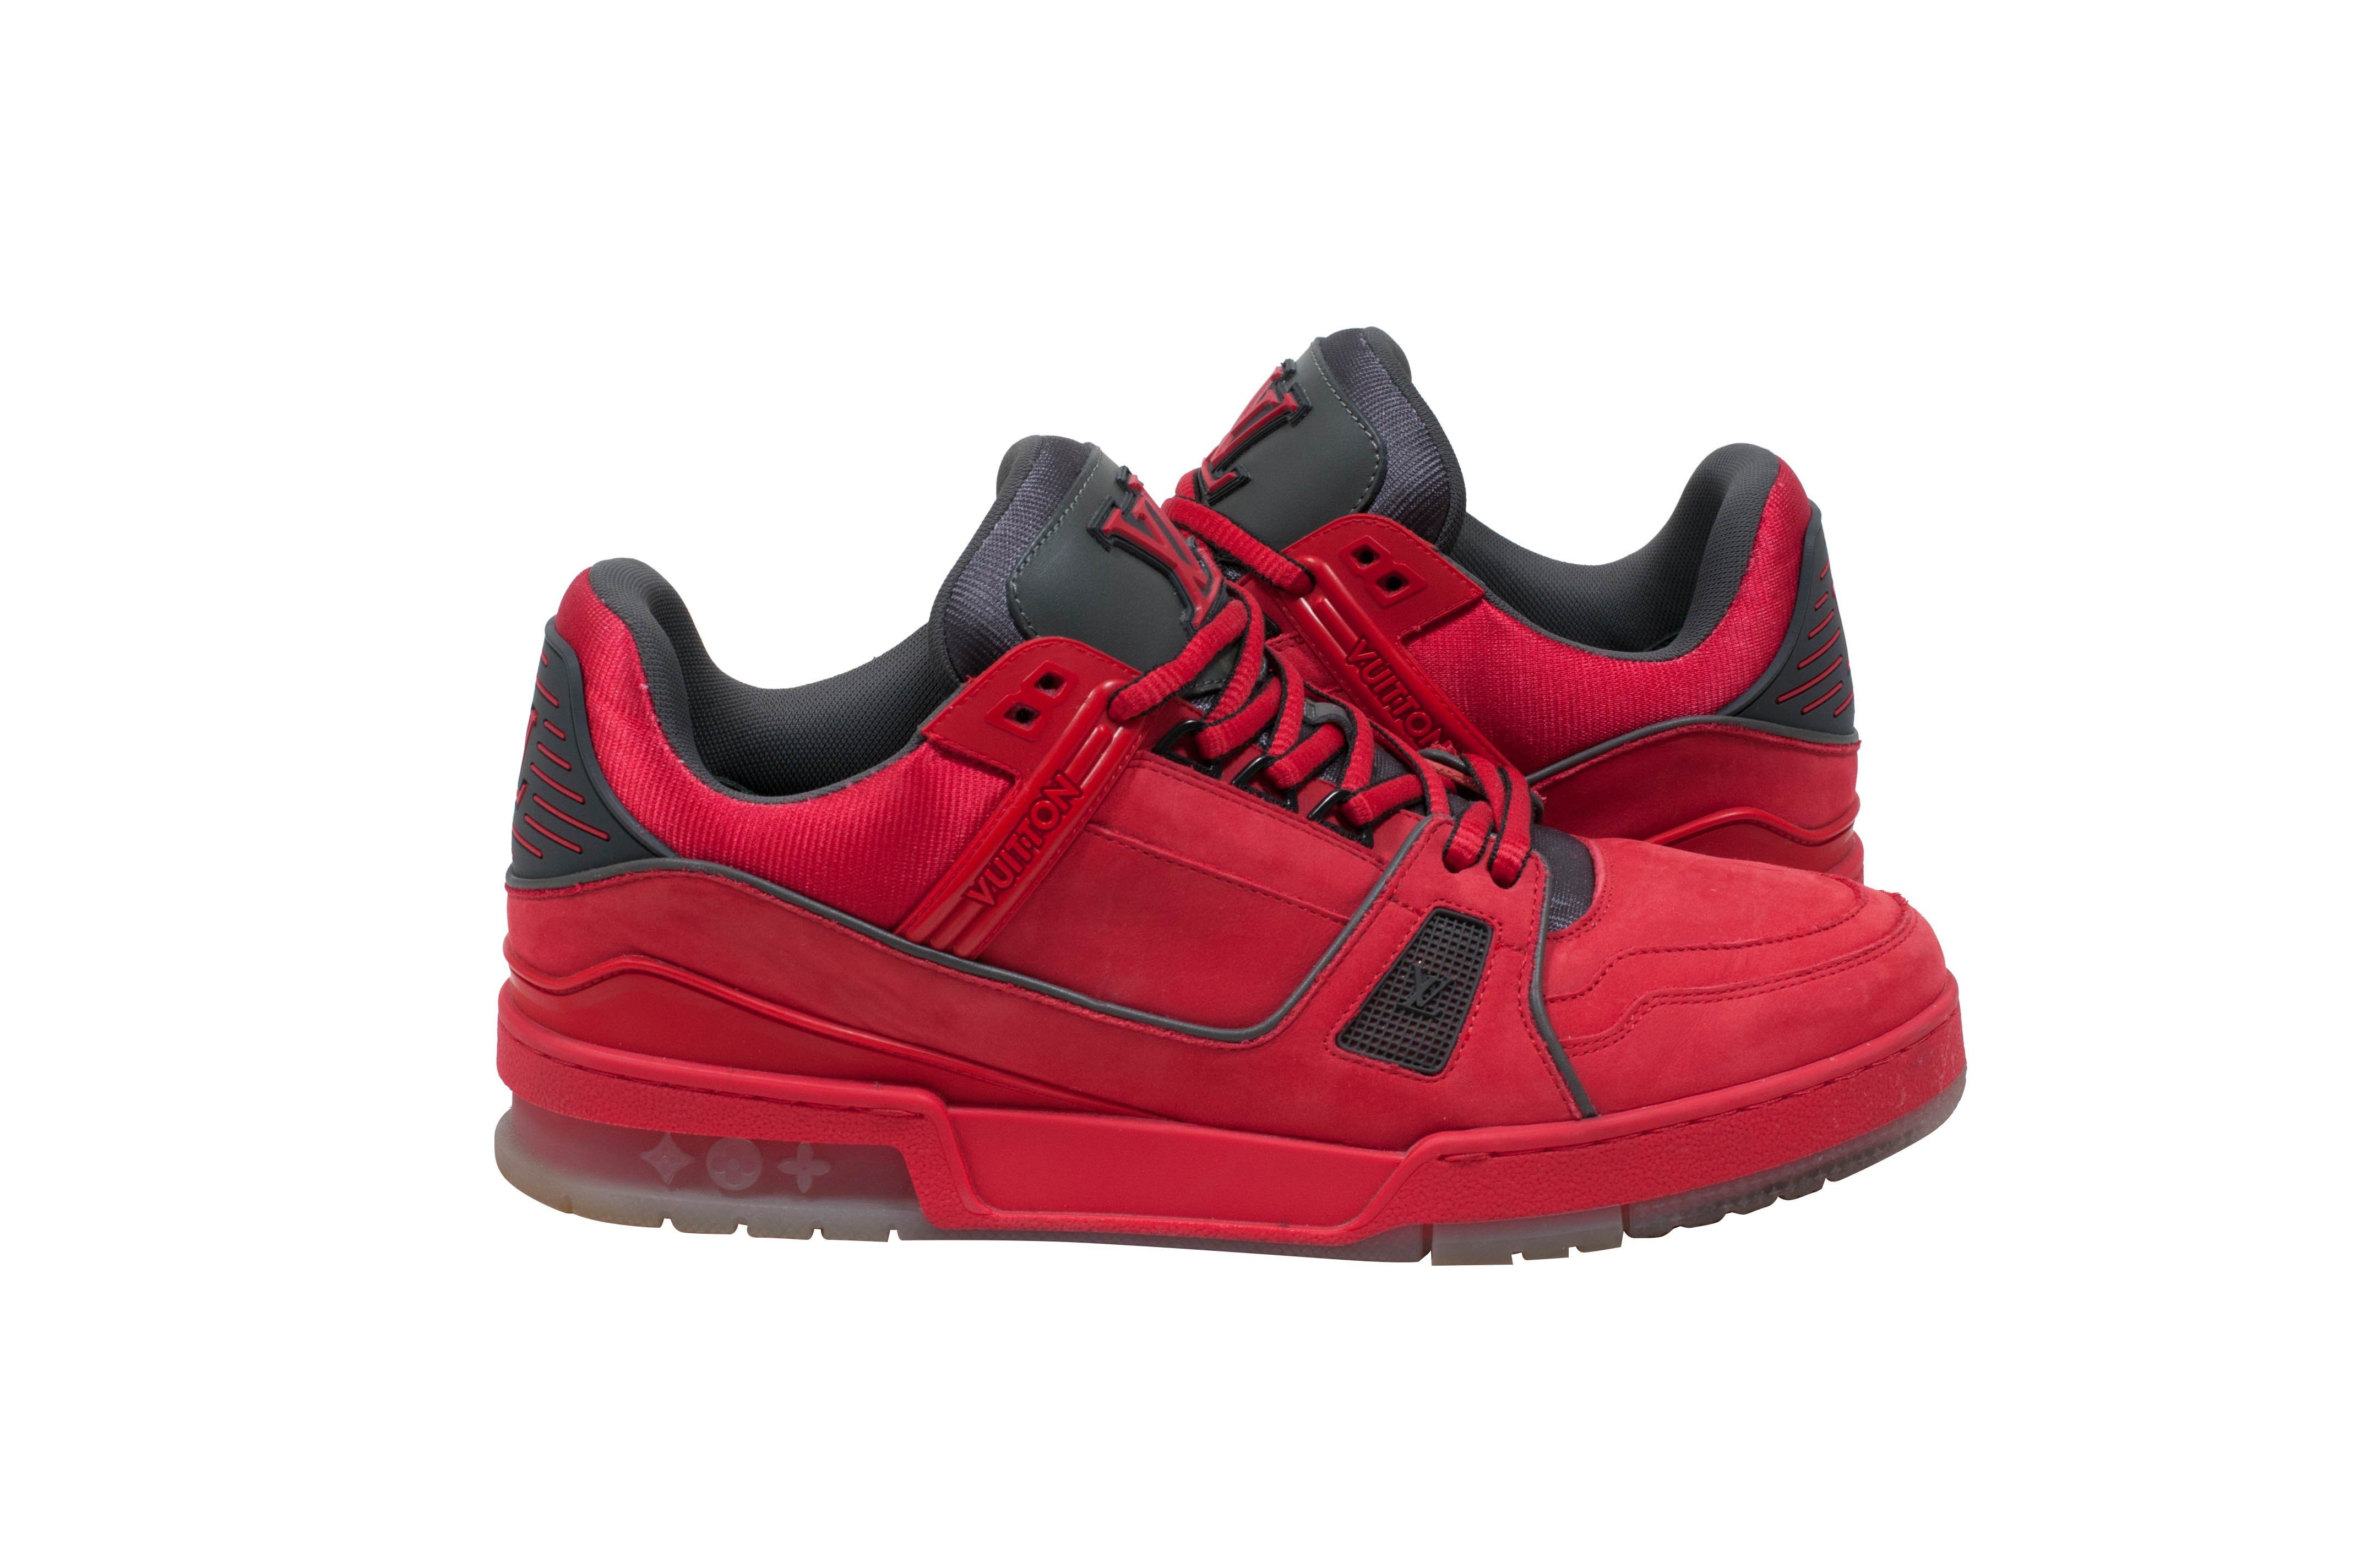 Trainers Louis Vuitton Red size 7 US in Suede - 27469076